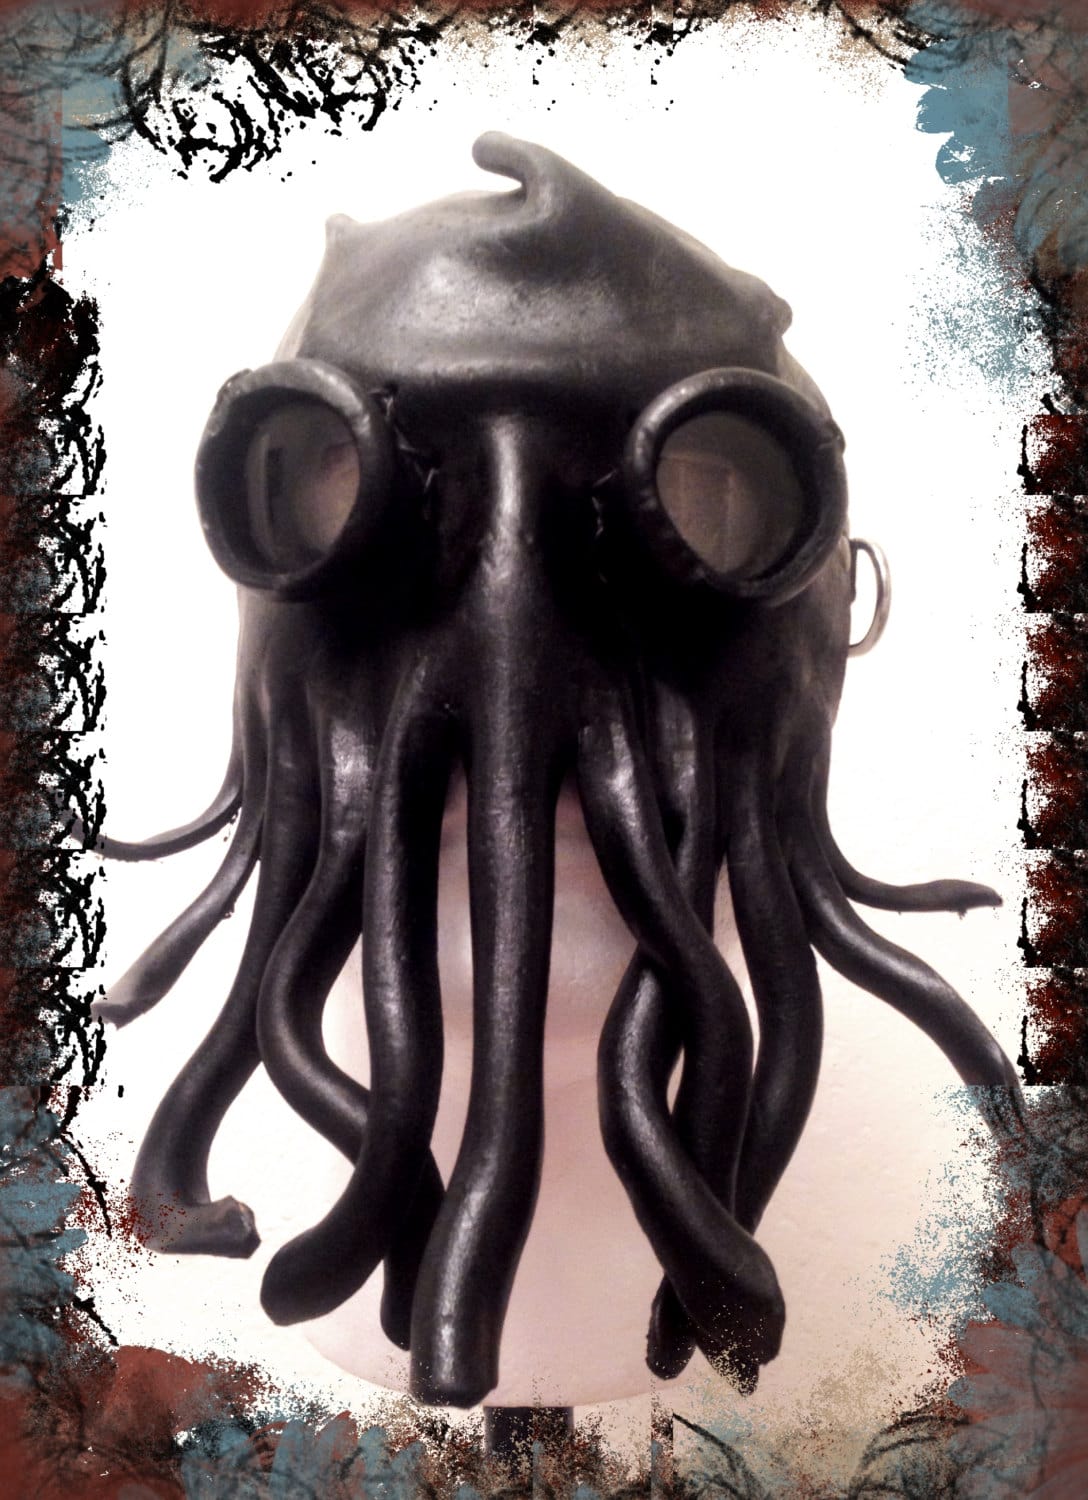 Cthulhu Cultist with Googles